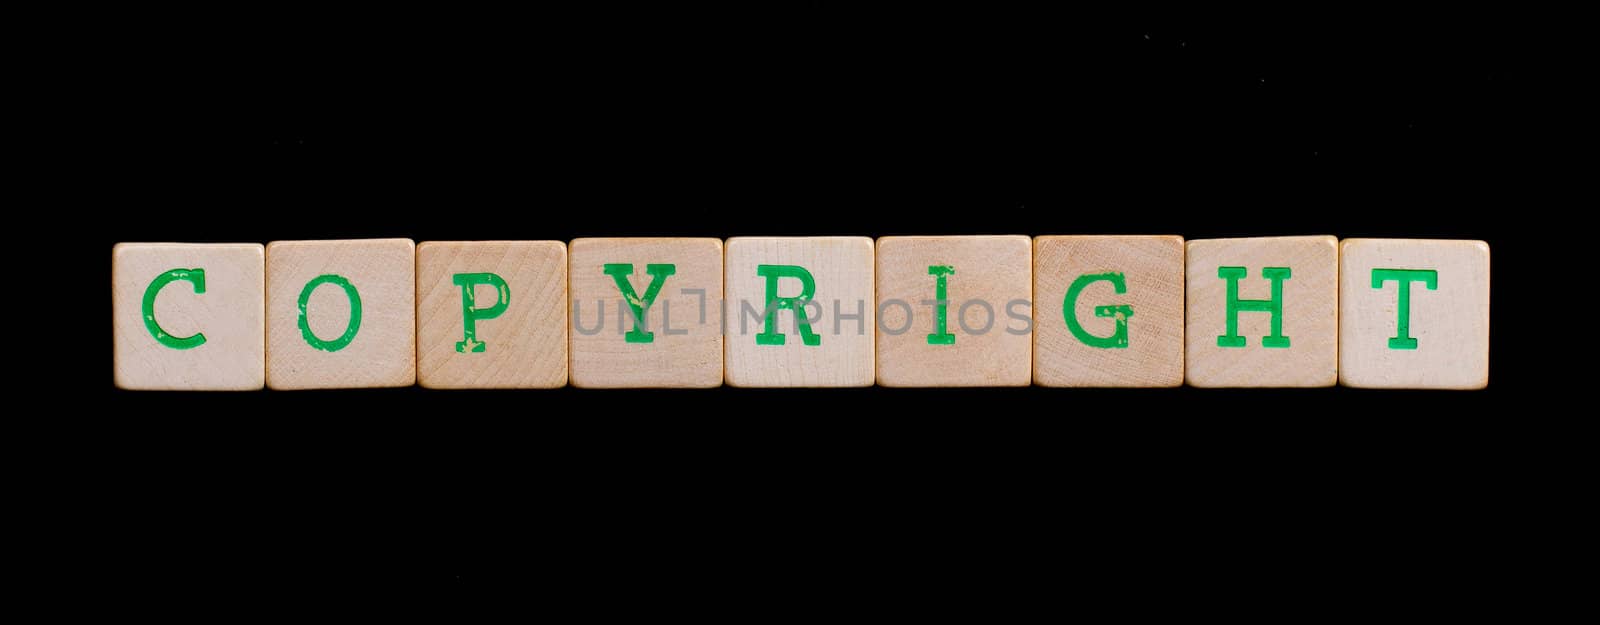 Green letters on old wooden blocks (copyright)